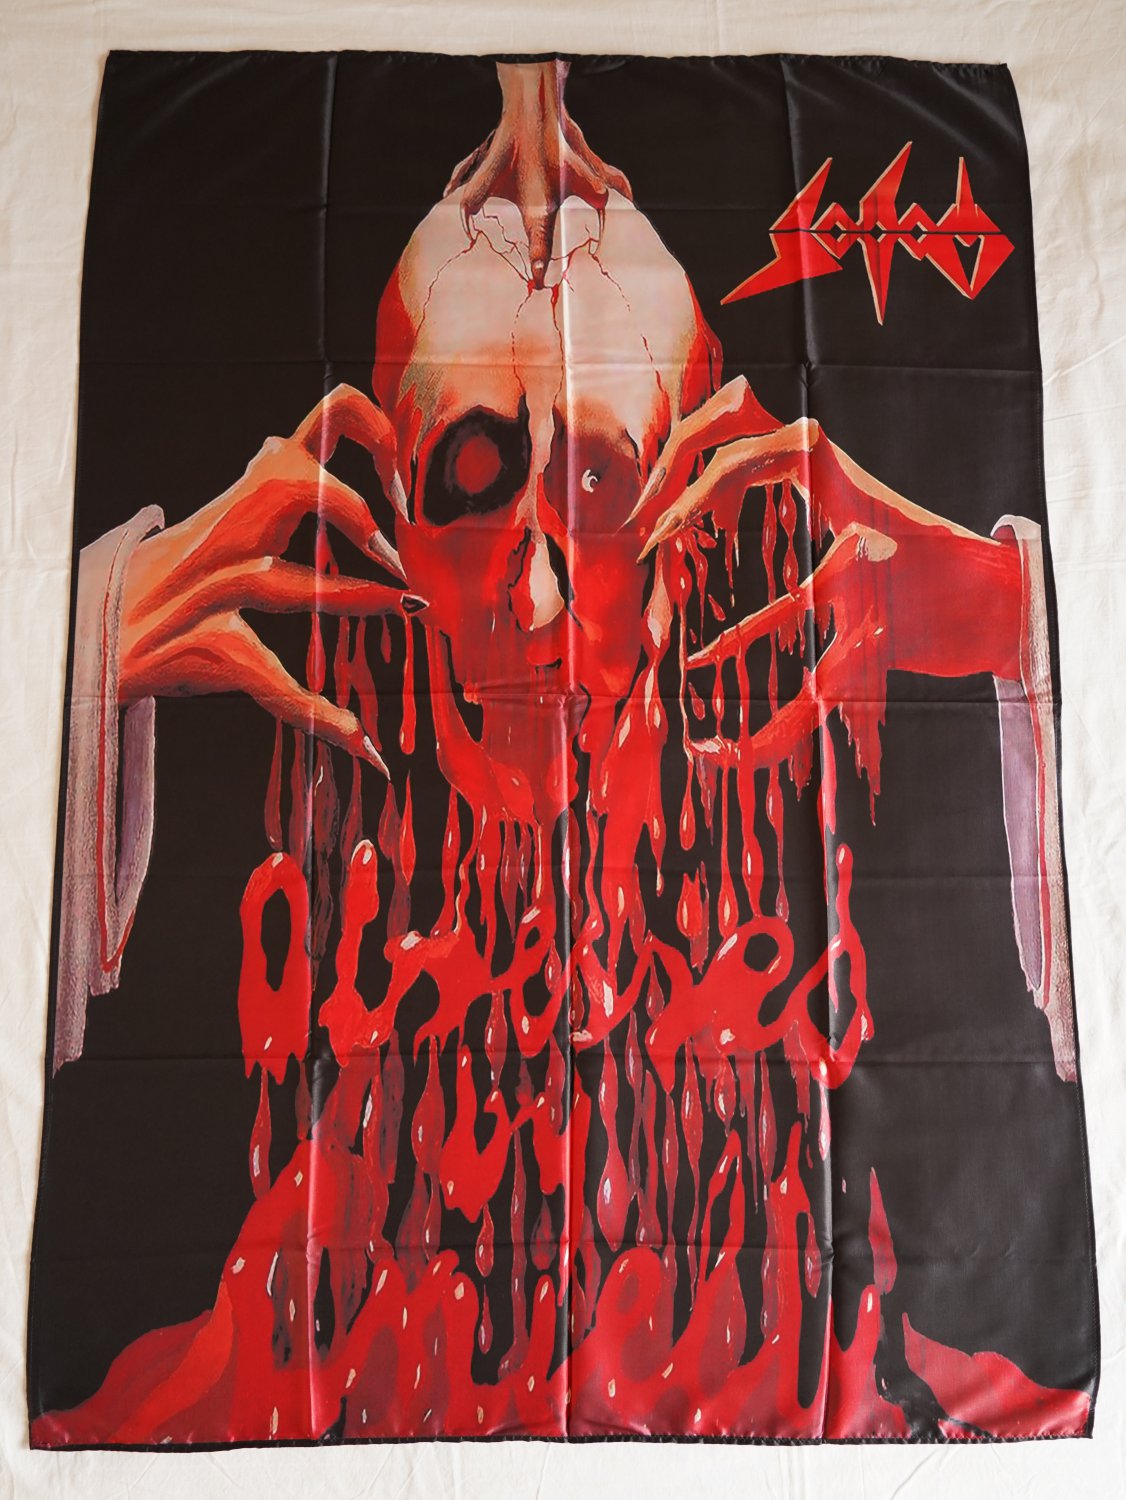 SODOM - Obsessed by cruelty FLAG cloth POSTER Banner Thrash METAL Angelripper